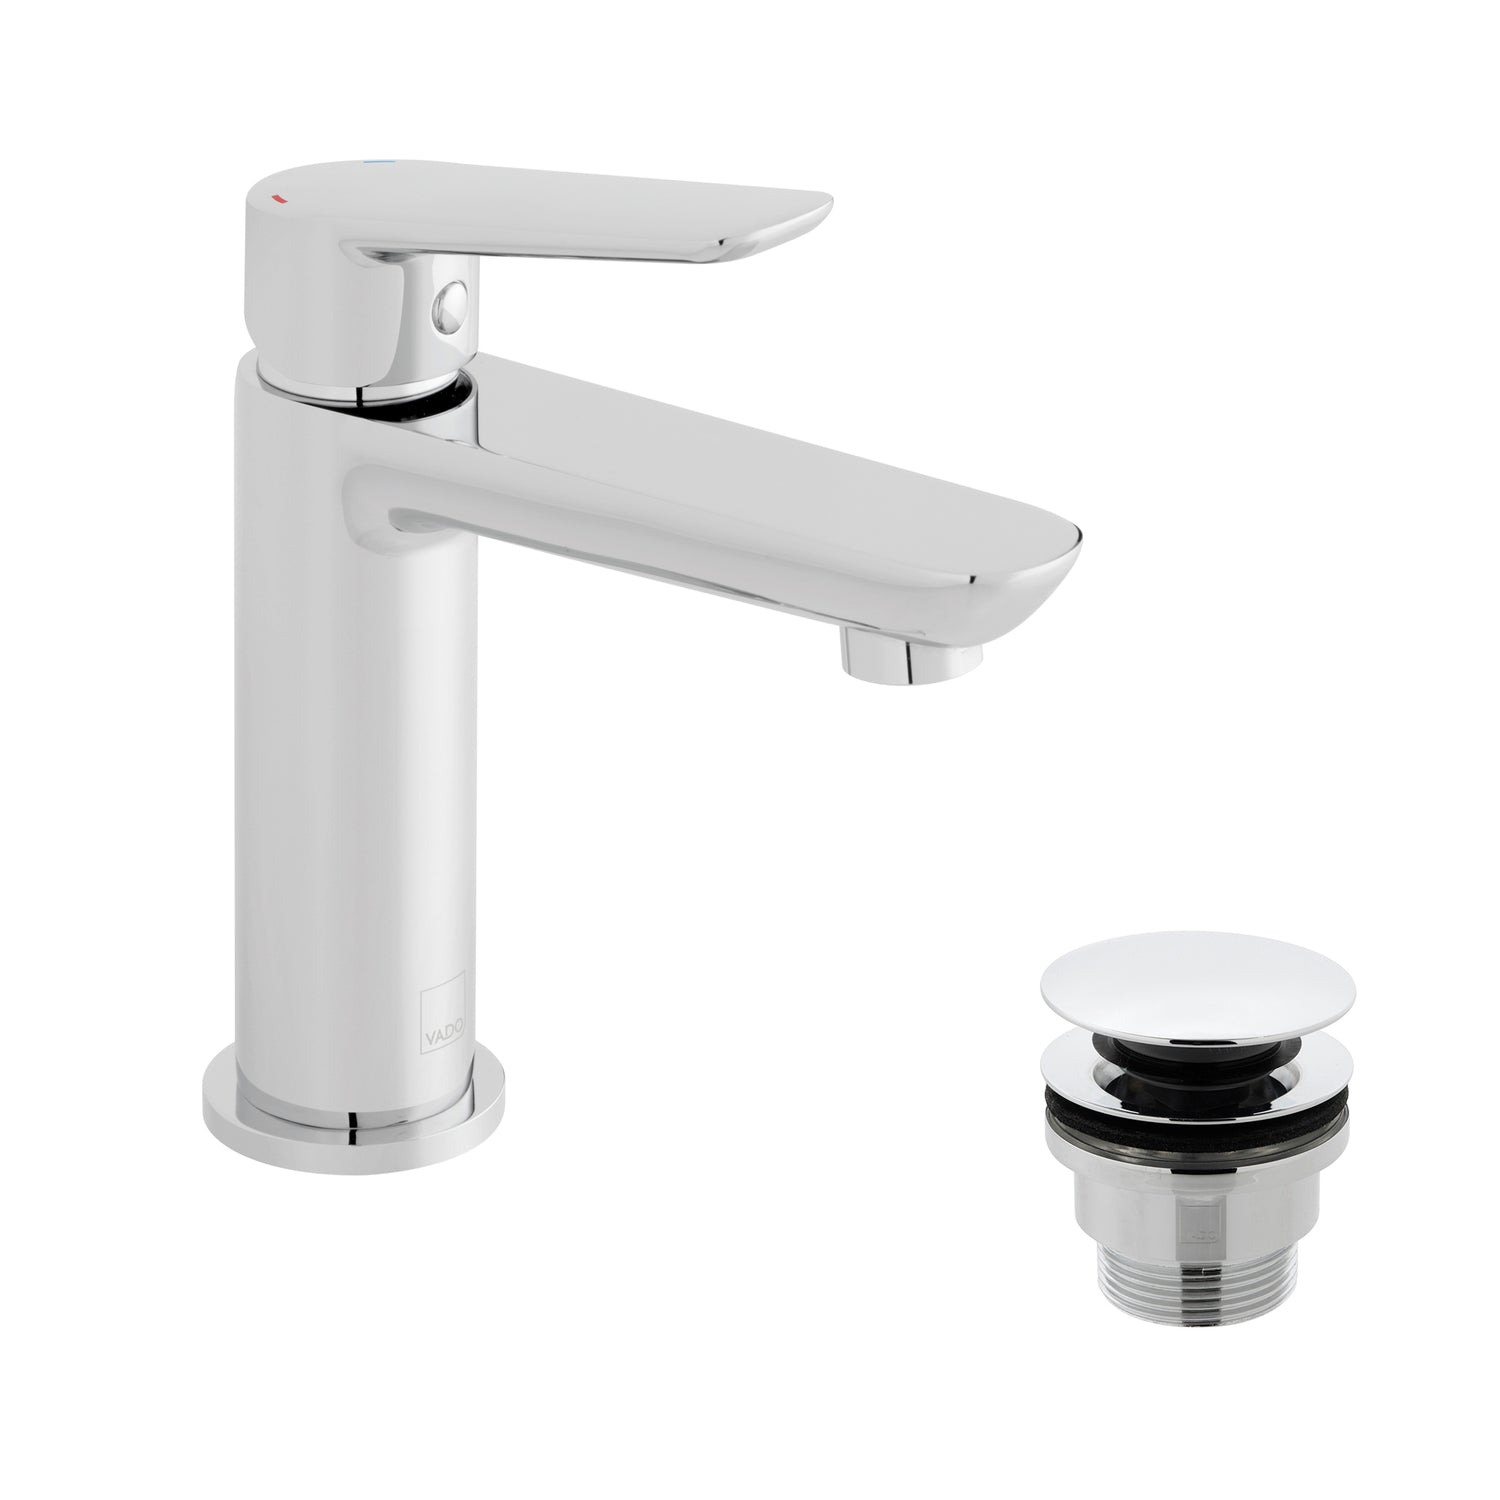 Vado Photon Mini Mono Basin Mixer Smooth Bodied Single Lever Deck Mounted with Universal Waste